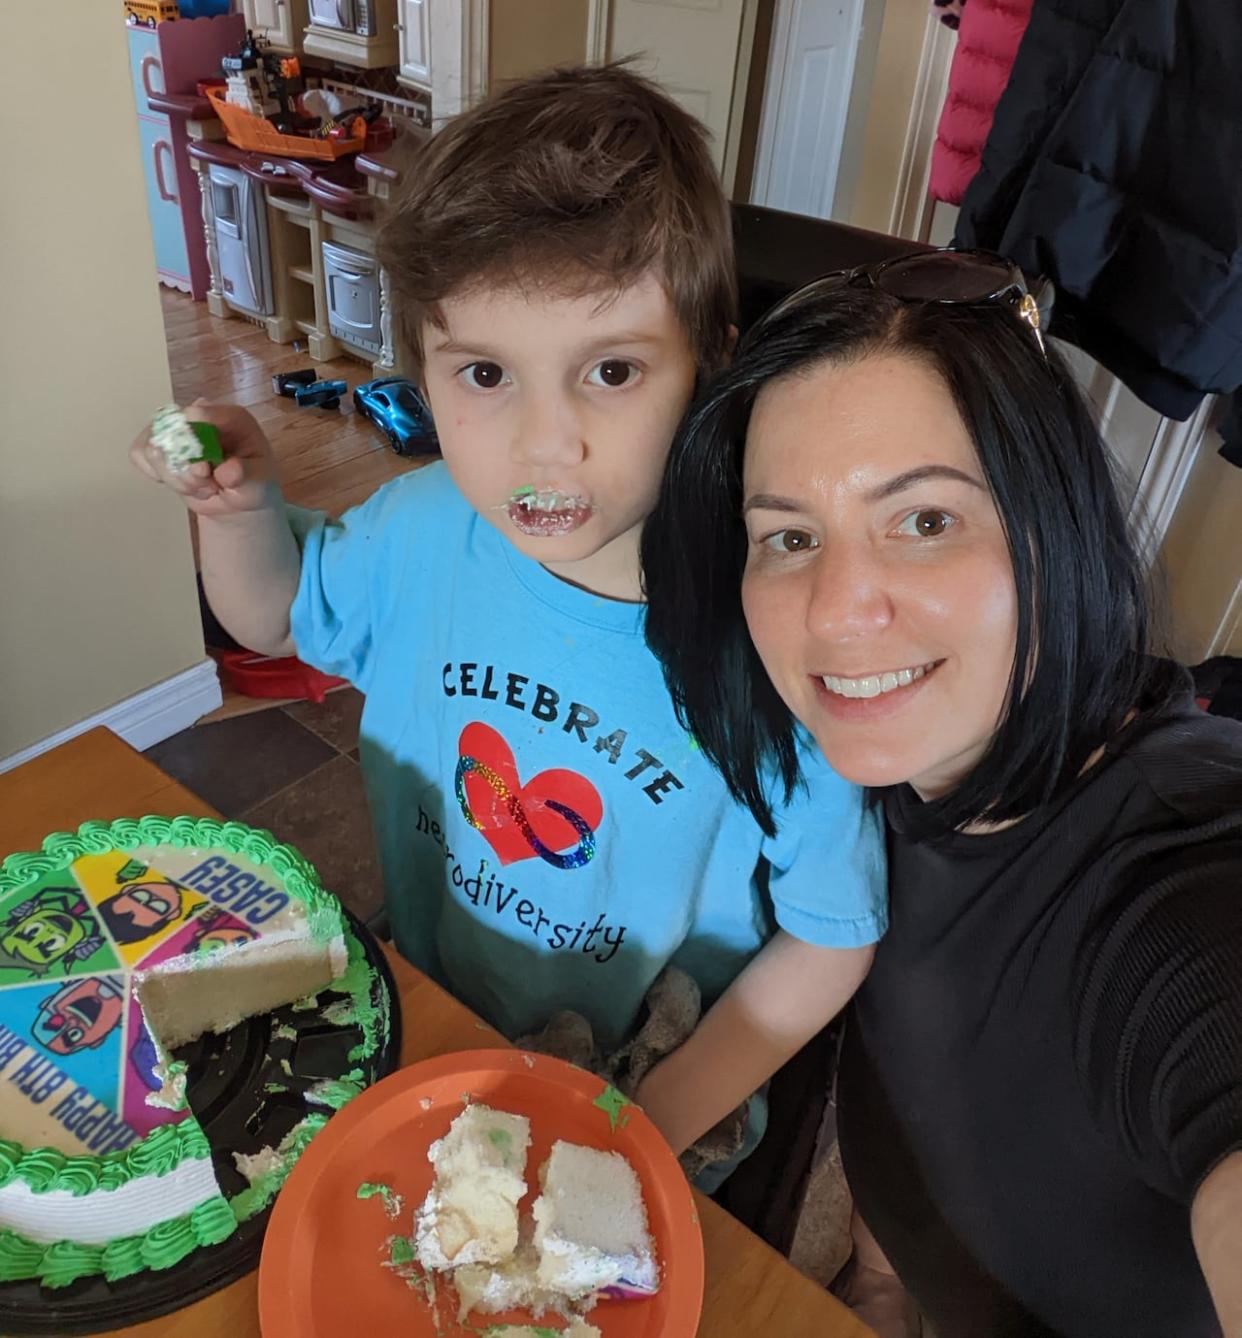 Stephanie Morris's son Casey was diagnosed with autism at two years old. She said they were regularly invited to talk to Casey's classmates about autism when they lived in Newfoundland.  (Submitted by Stephanie Morris - image credit)